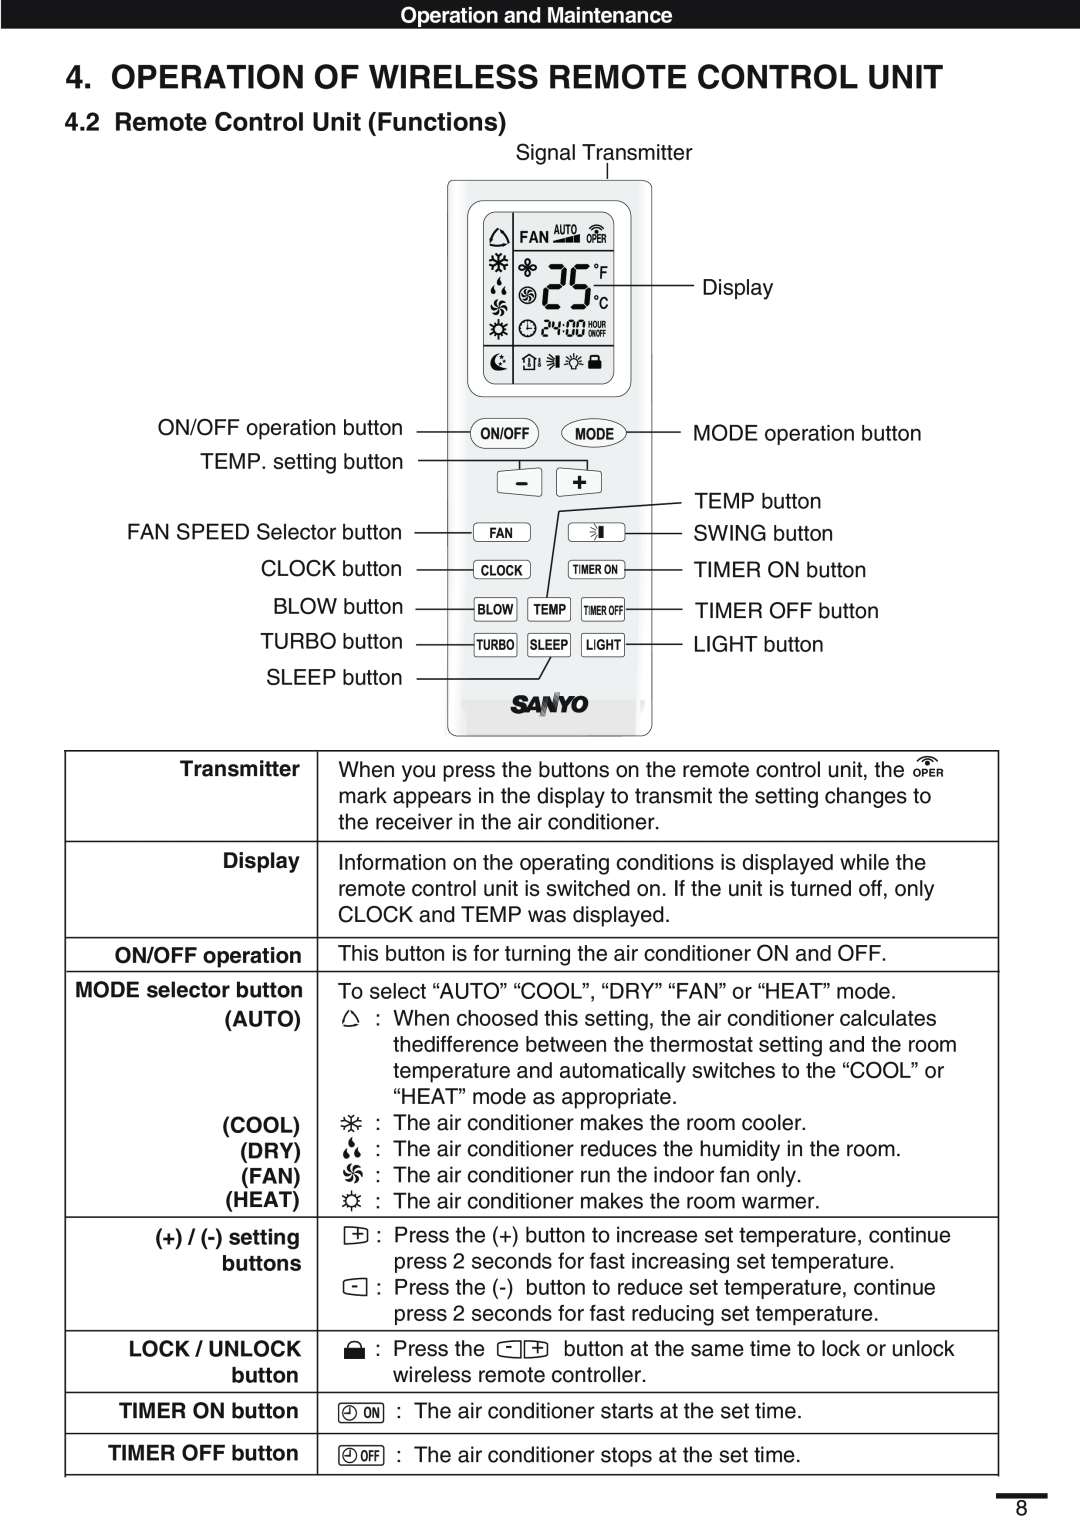 Haier SAP-K18AM Operation Of Wireless Remote Control Unit, Remote Control Unit Functions, Operation and Maintenance, Auto 